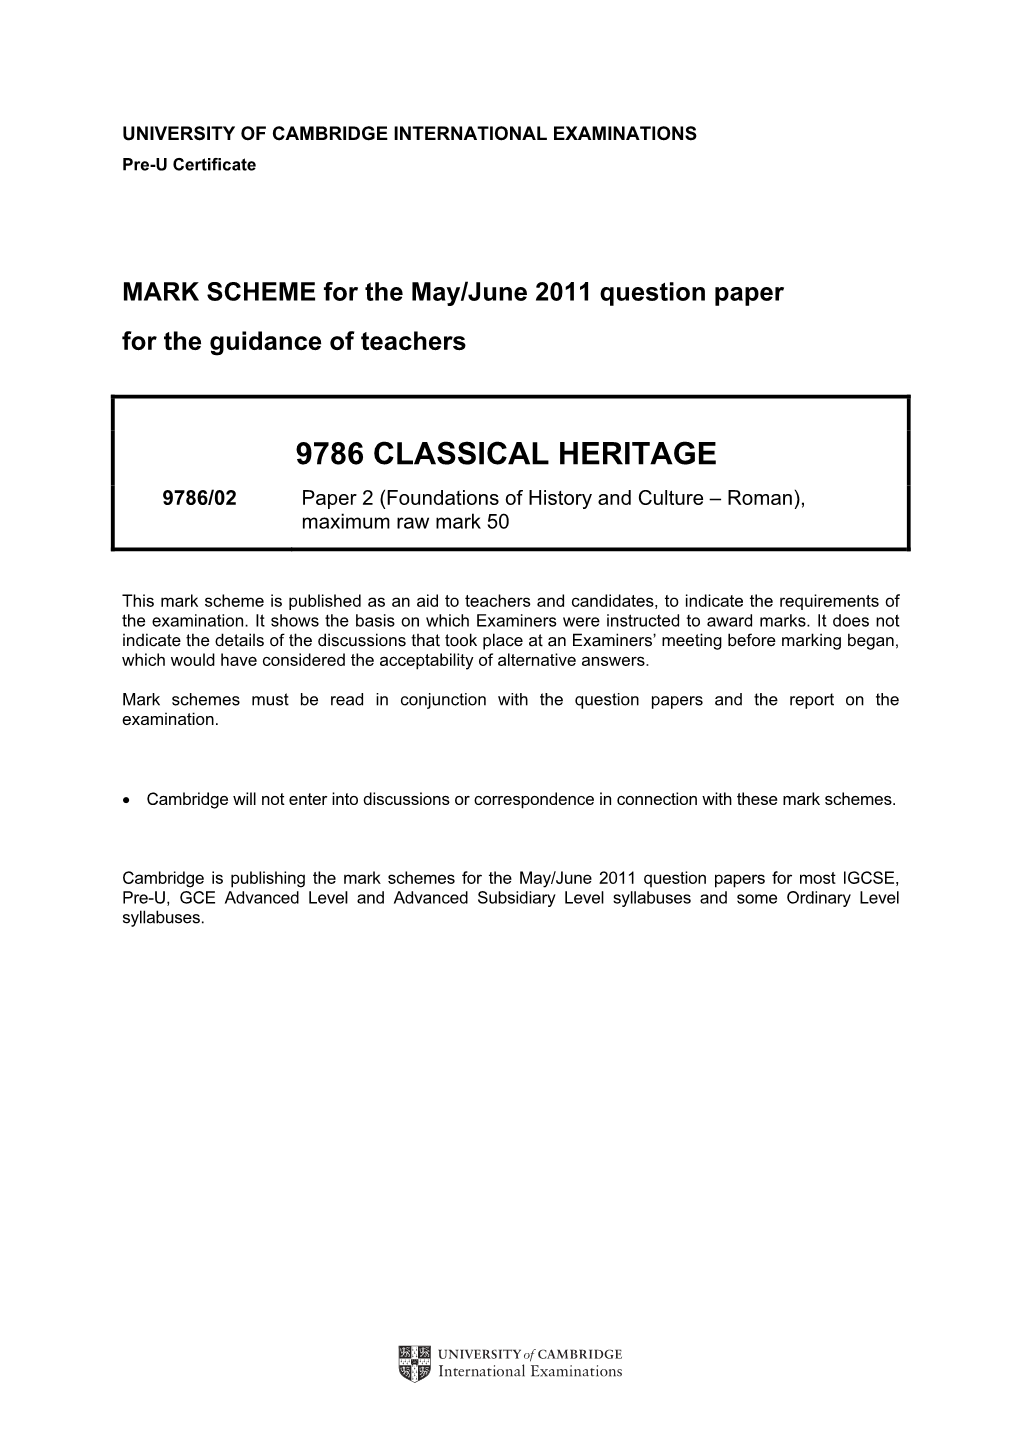 9786 CLASSICAL HERITAGE 9786/02 Paper 2 (Foundations of History and Culture – Roman), Maximum Raw Mark 50